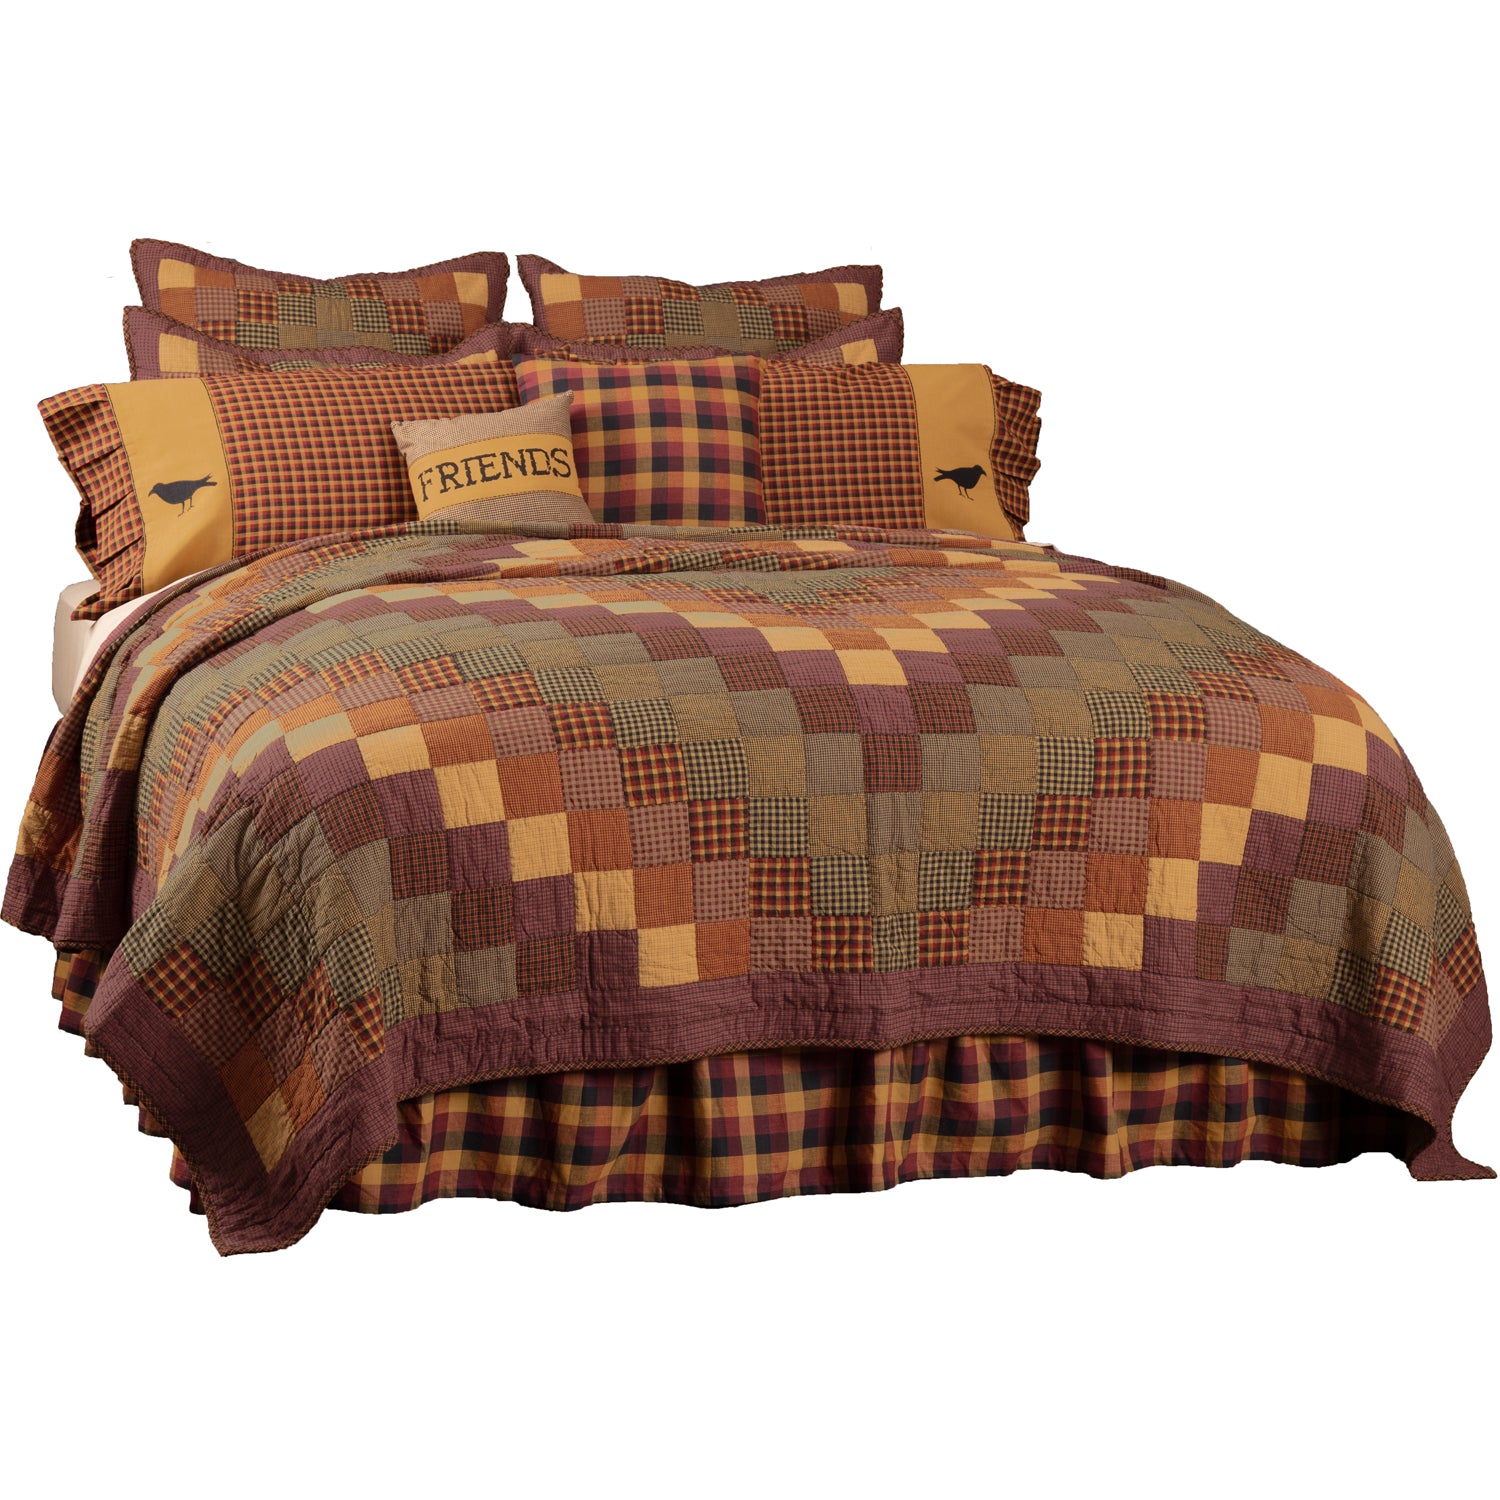 Mayflower Market Heritage Farms Queen Quilt 90Wx90L By VHC Brands